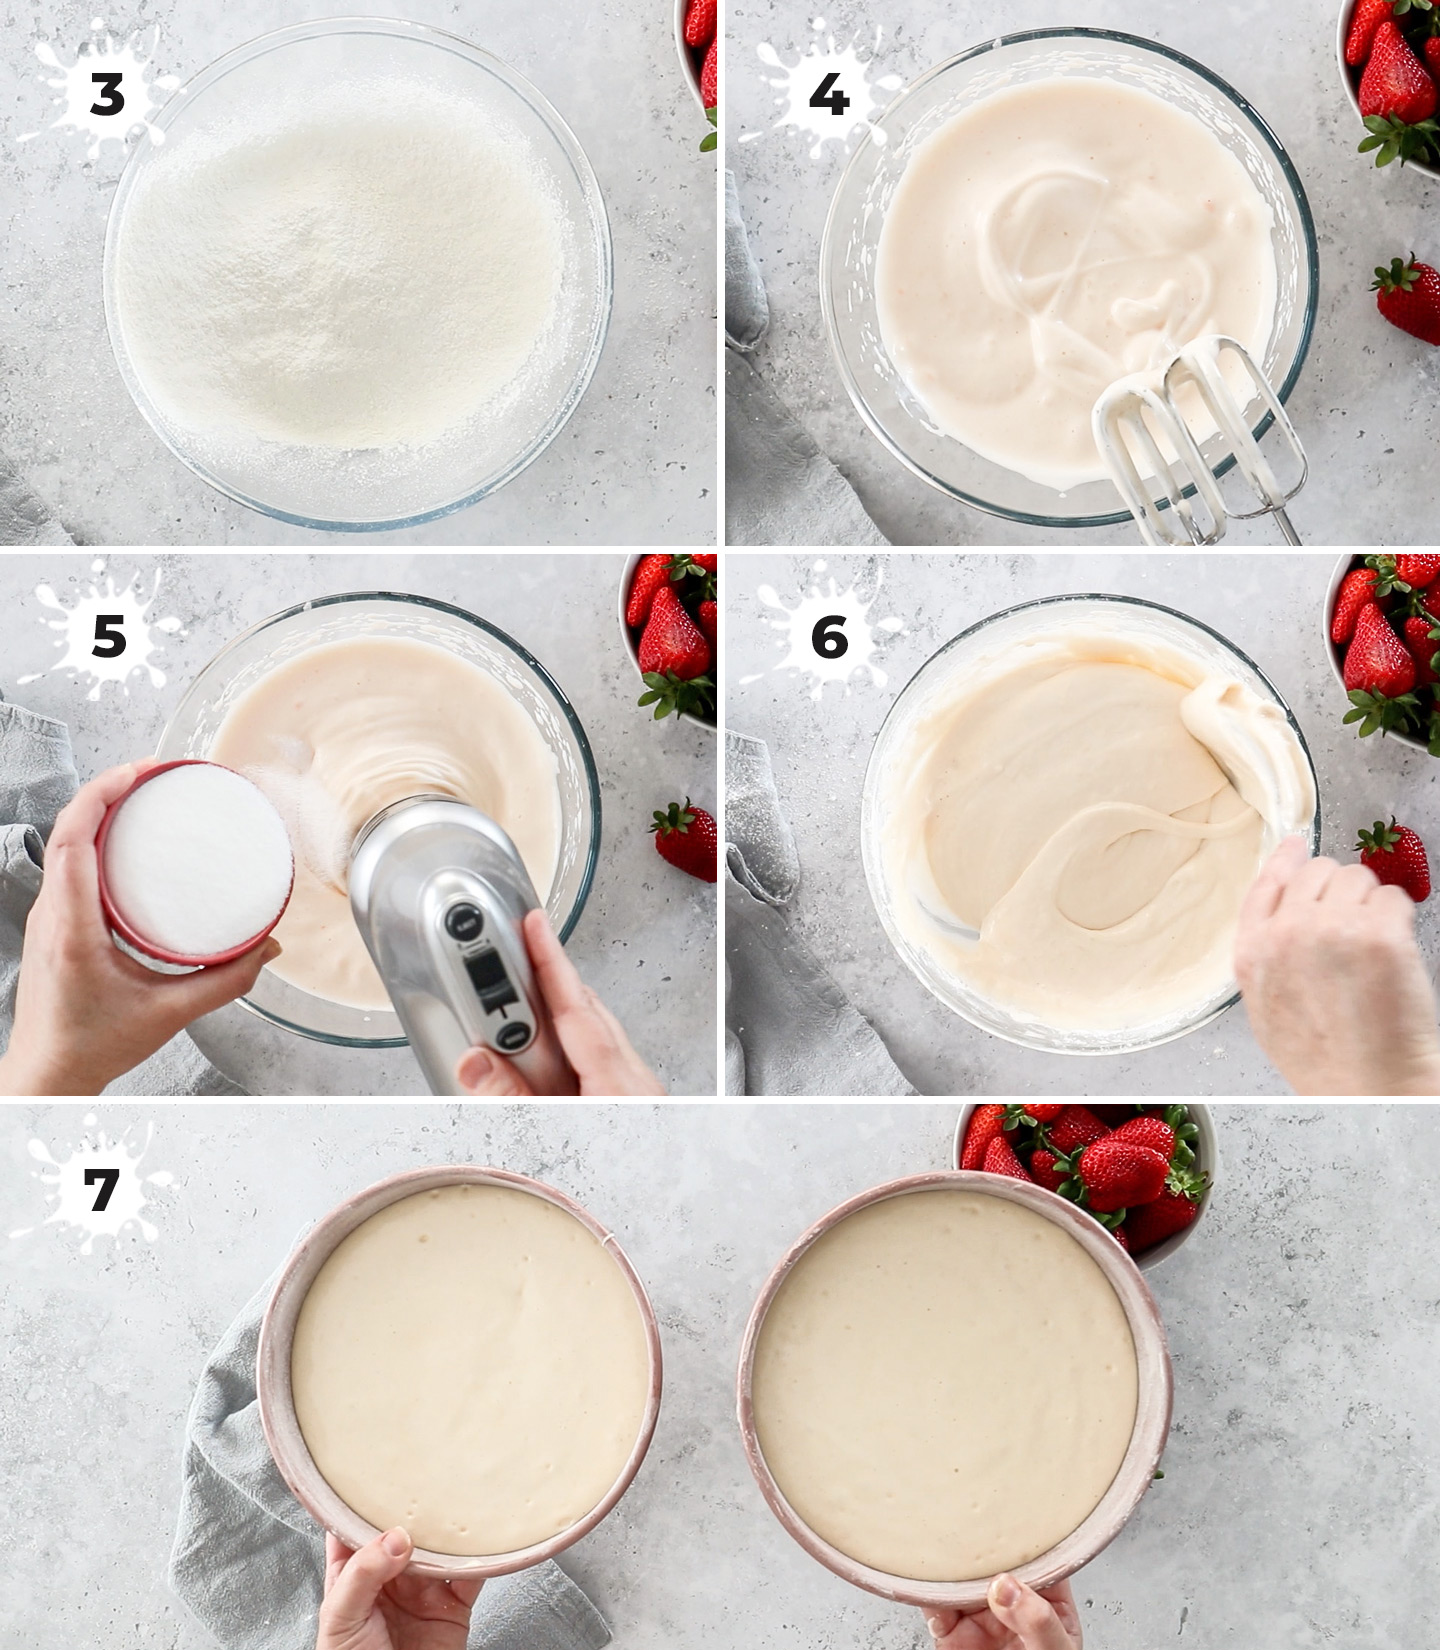 A collage showing how to make the sponge cake batter.